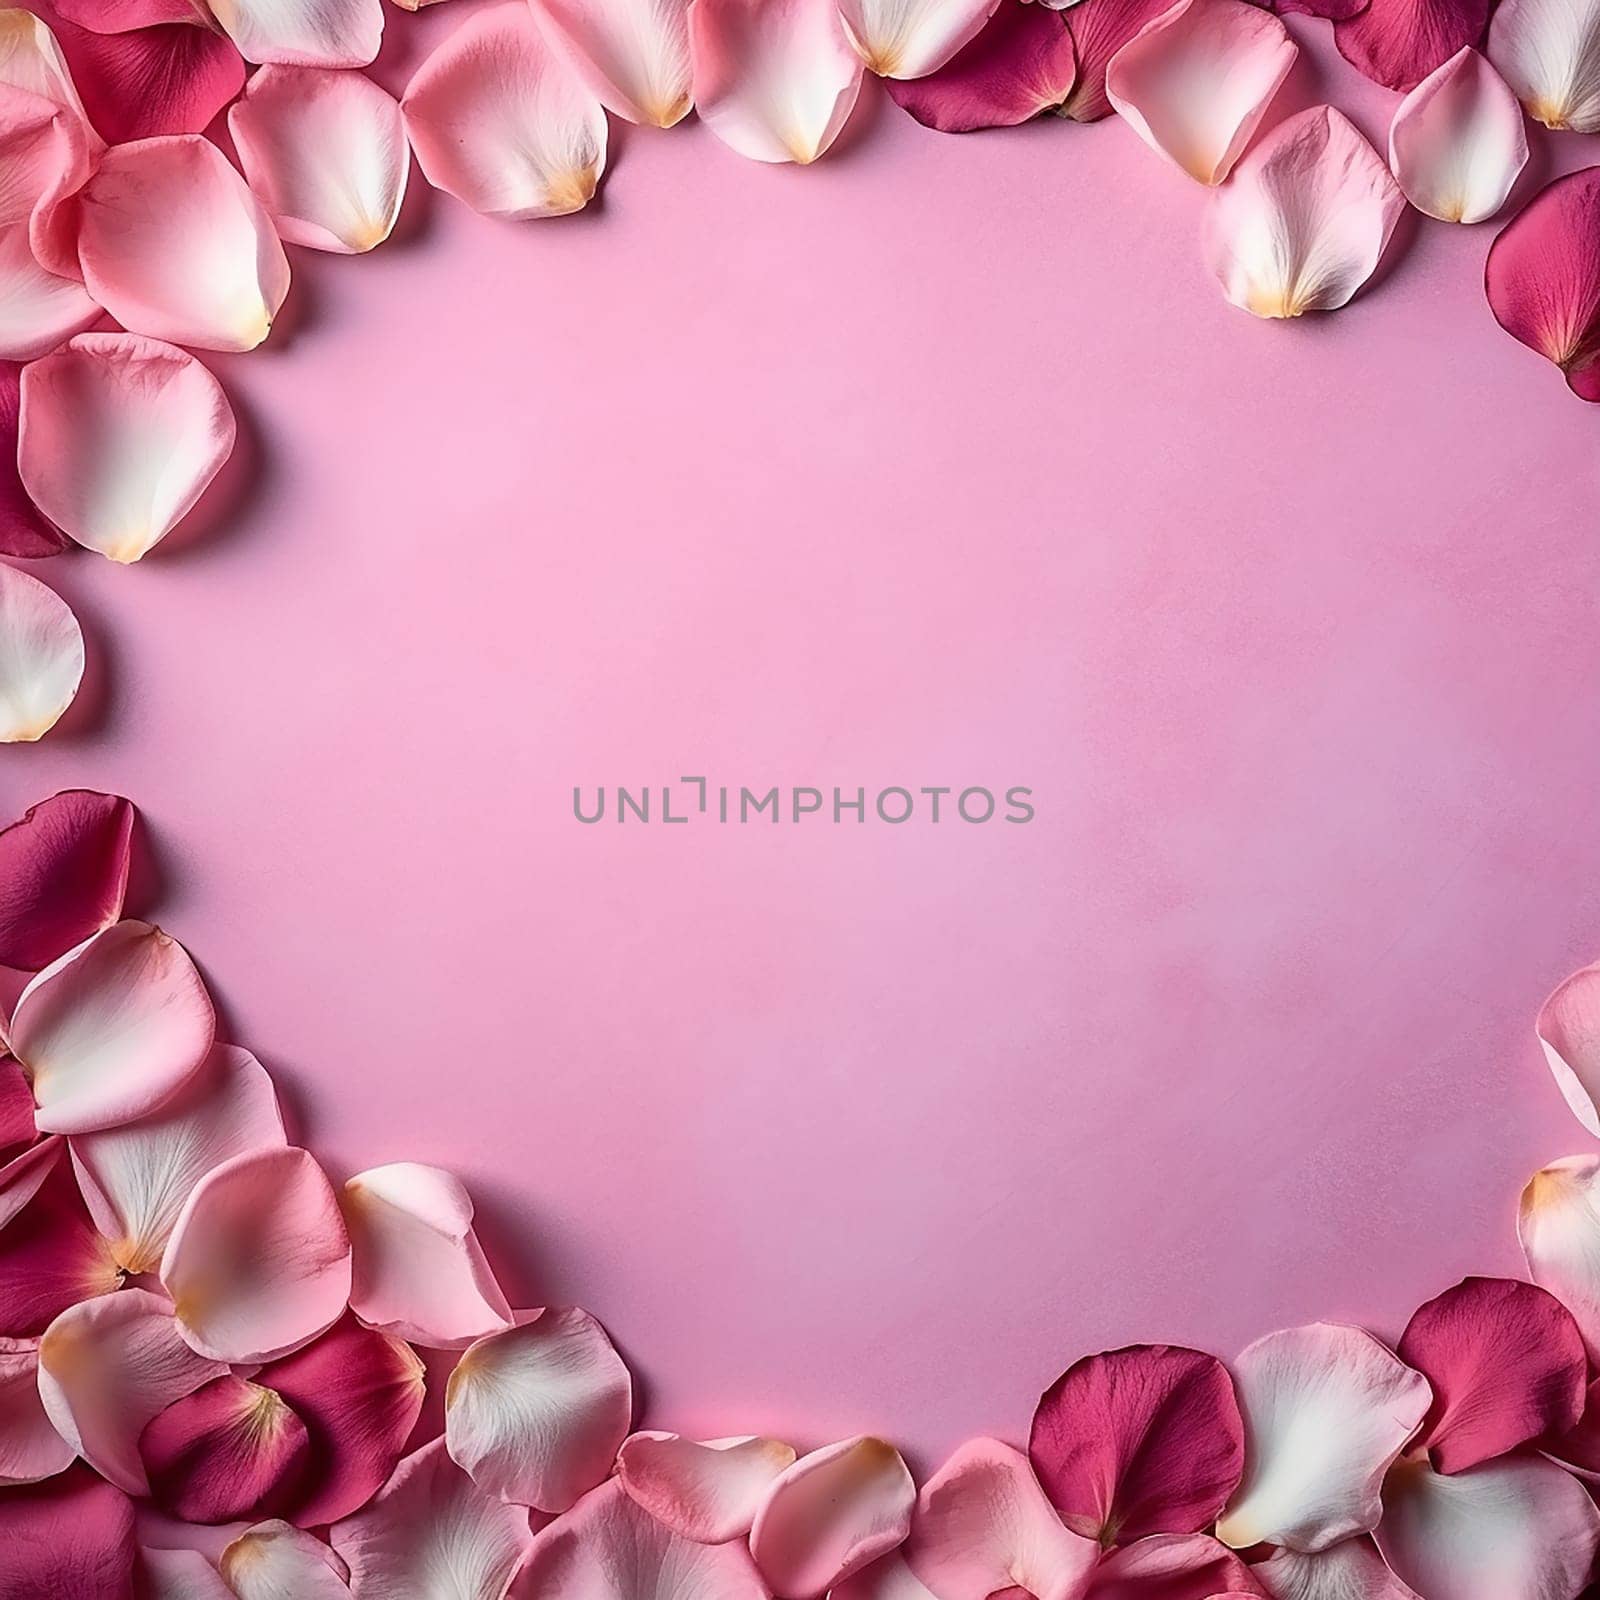 Pink background framed by rose petals, perfect for romantic occasions.